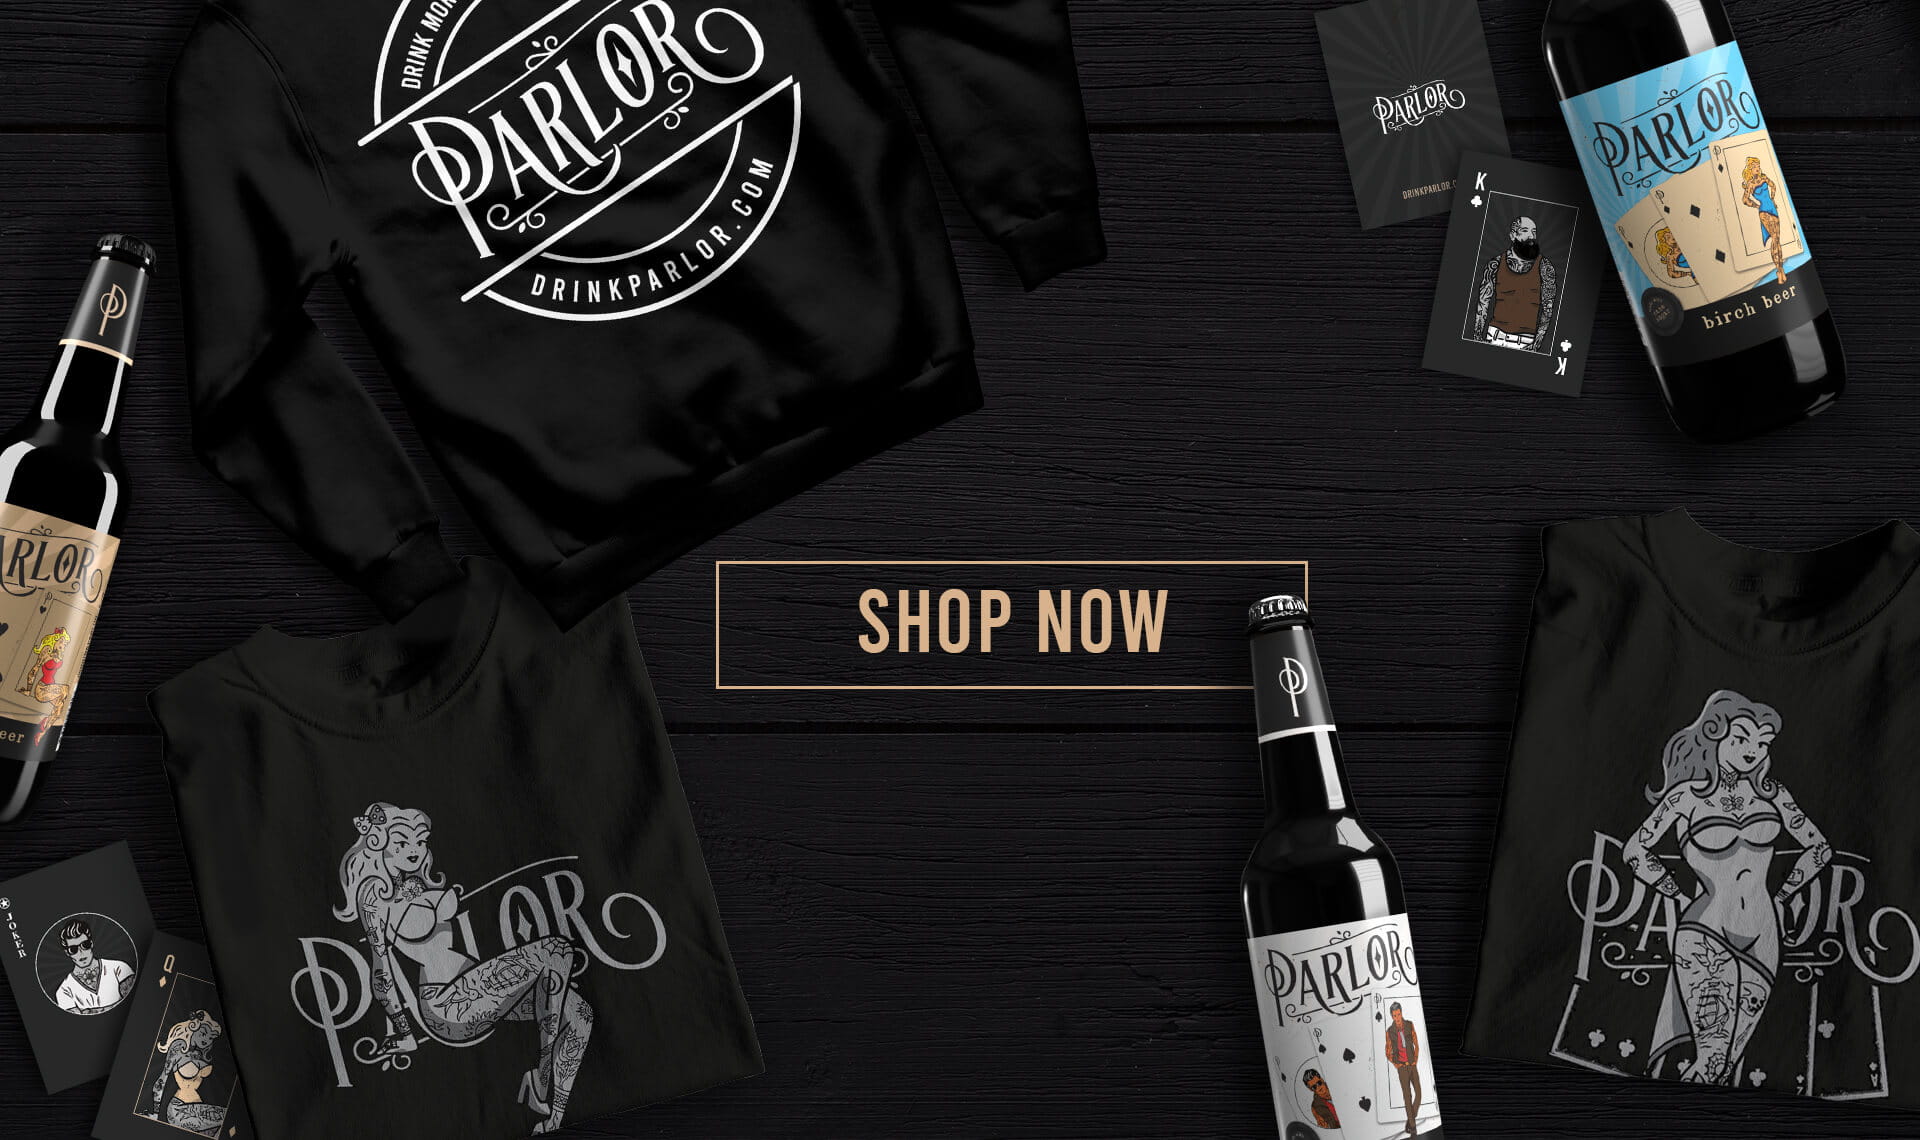 Pre-Order Now: Free deck of Parlor Playing Cards for the first 200 pre-orders